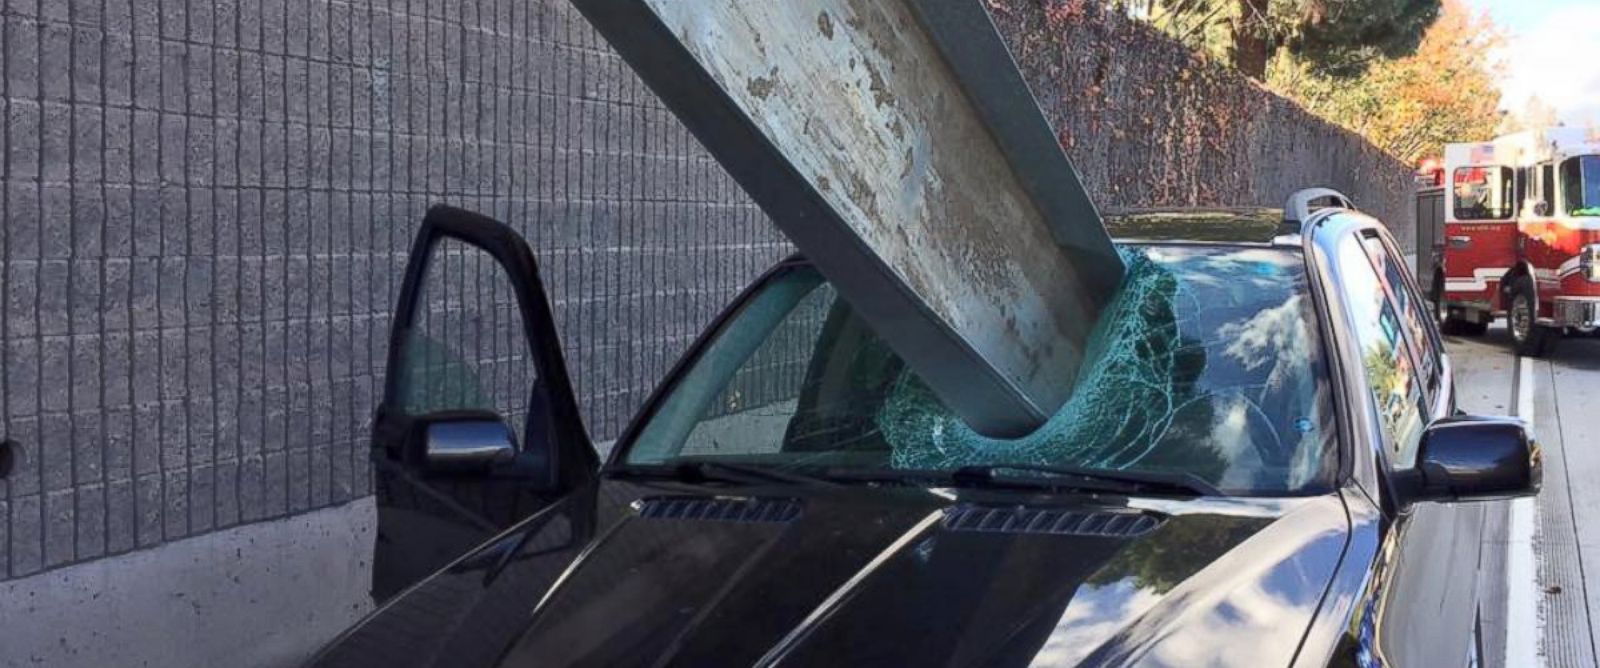 BMW Driver Has Close Call When Giant Piece of Metal Impales Windshield